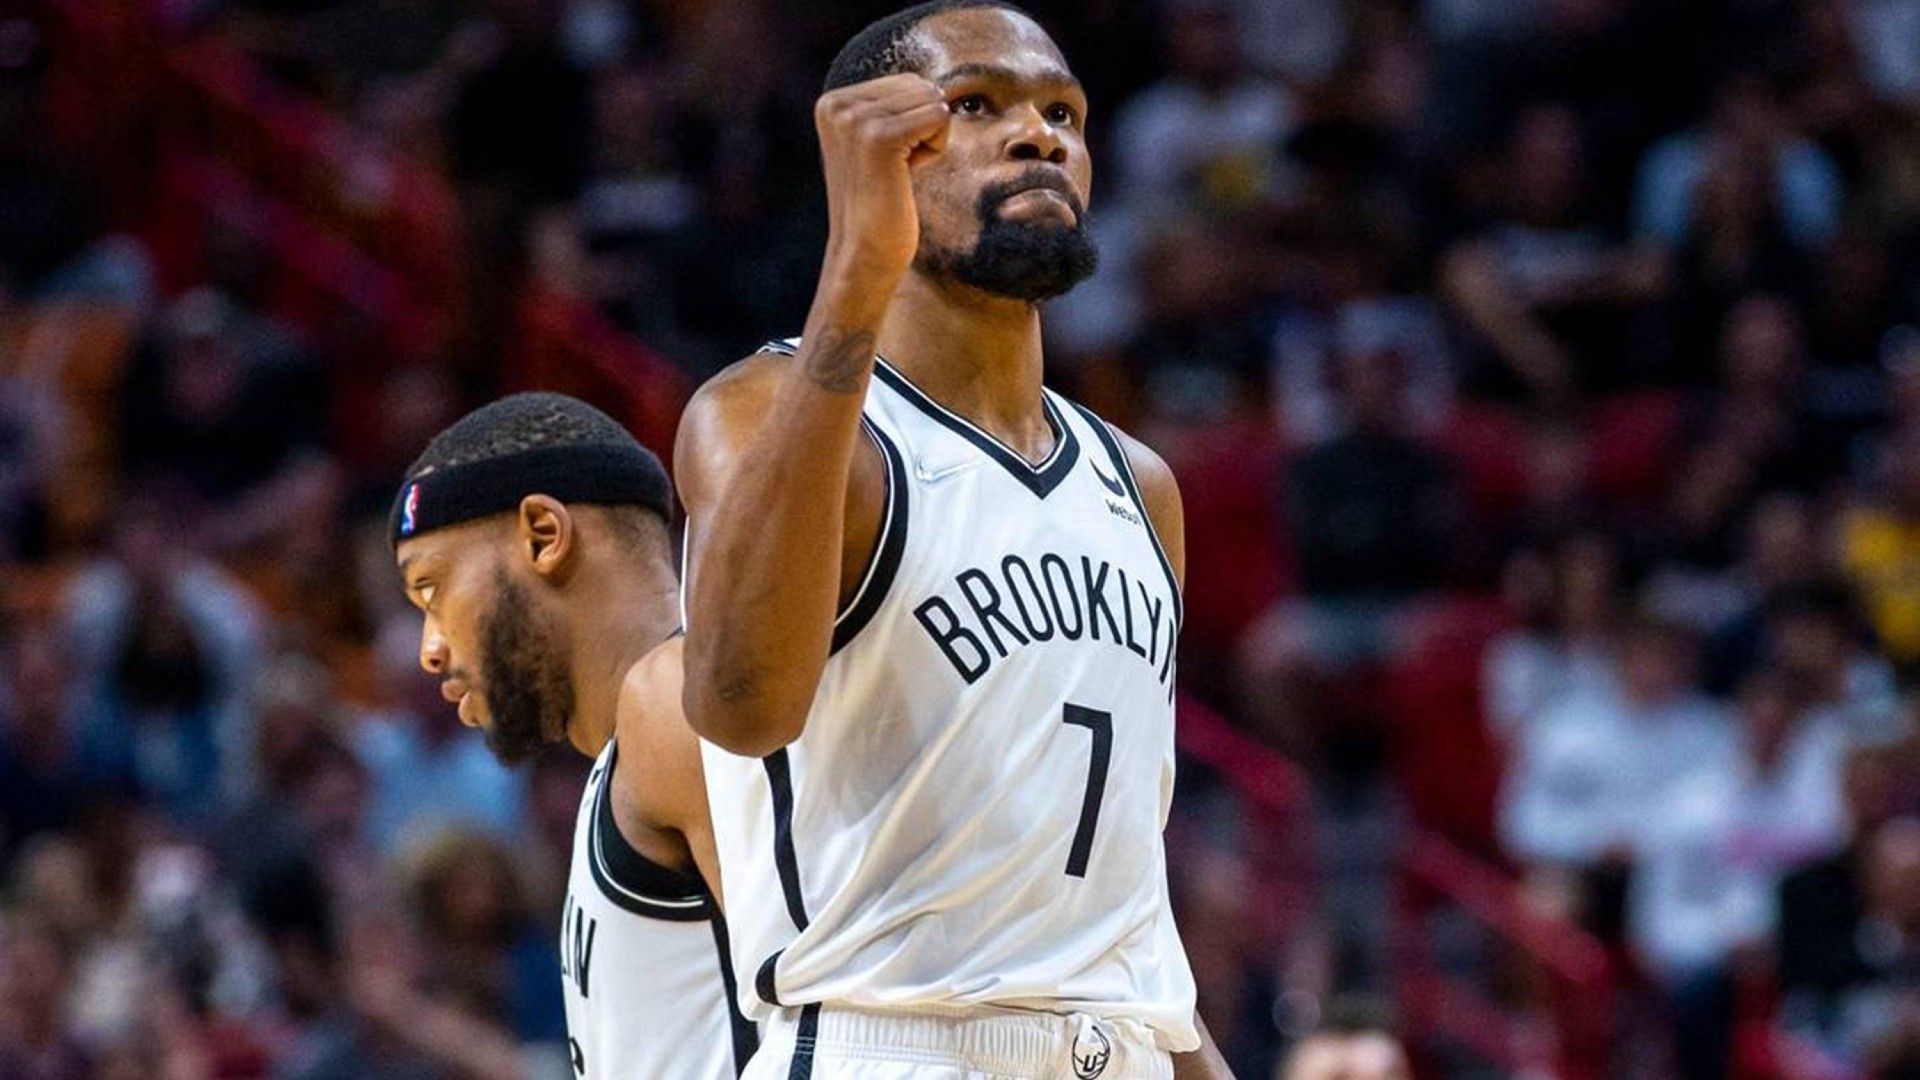 Kevin Durant doubles down on trade request, forcing Brooklyn Nets into big decision